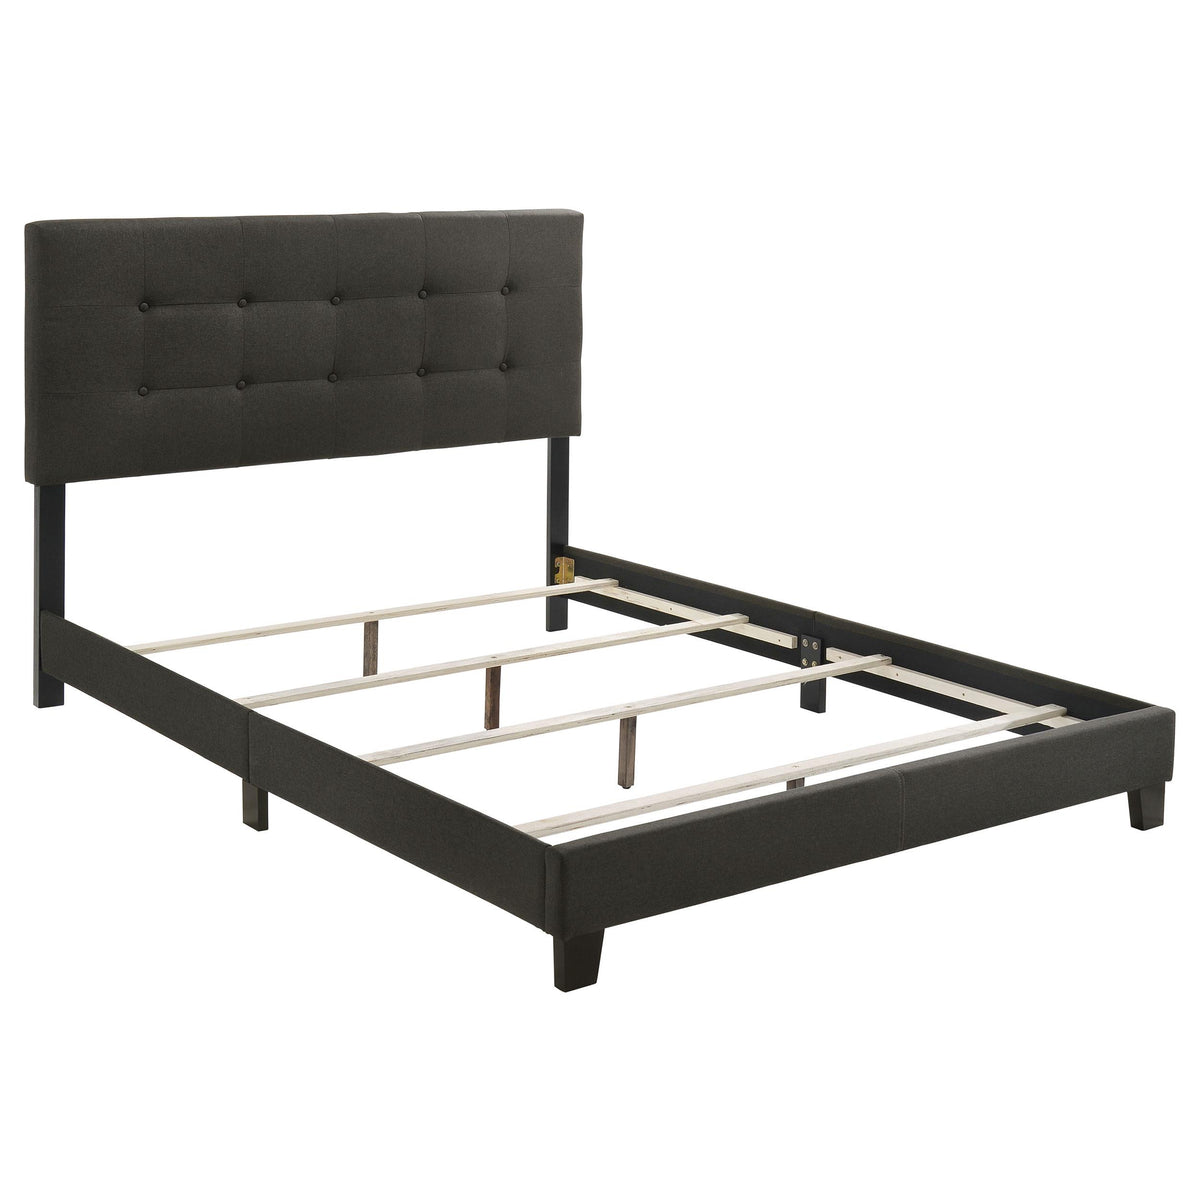 Mapes Upholstered Tufted Full Bed Charcoal Mapes Upholstered Tufted Full Bed Charcoal Half Price Furniture